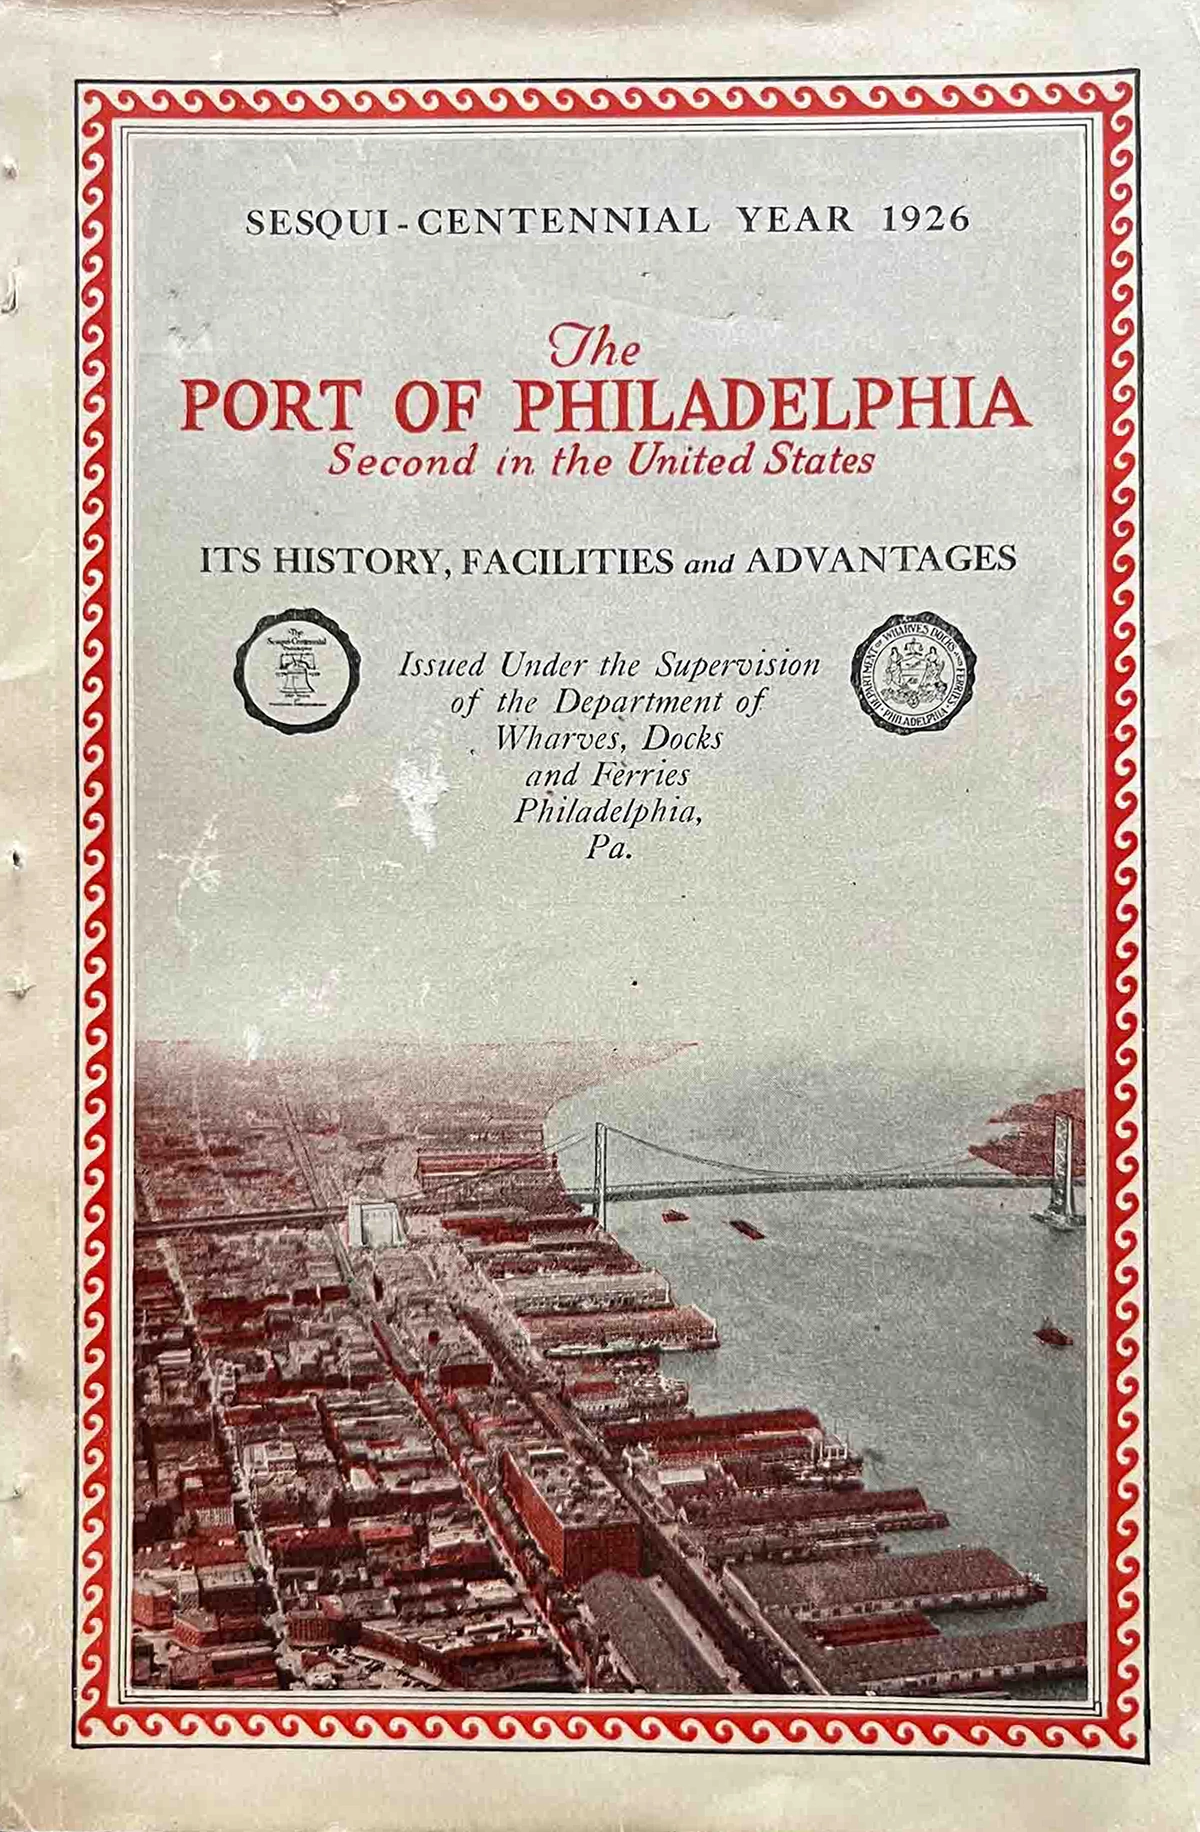 This Port of Philadelphia souvenir book, billing the port as “second in the United States,” is filled with shipping advertisements. Courtesy of Vic Bozarth.